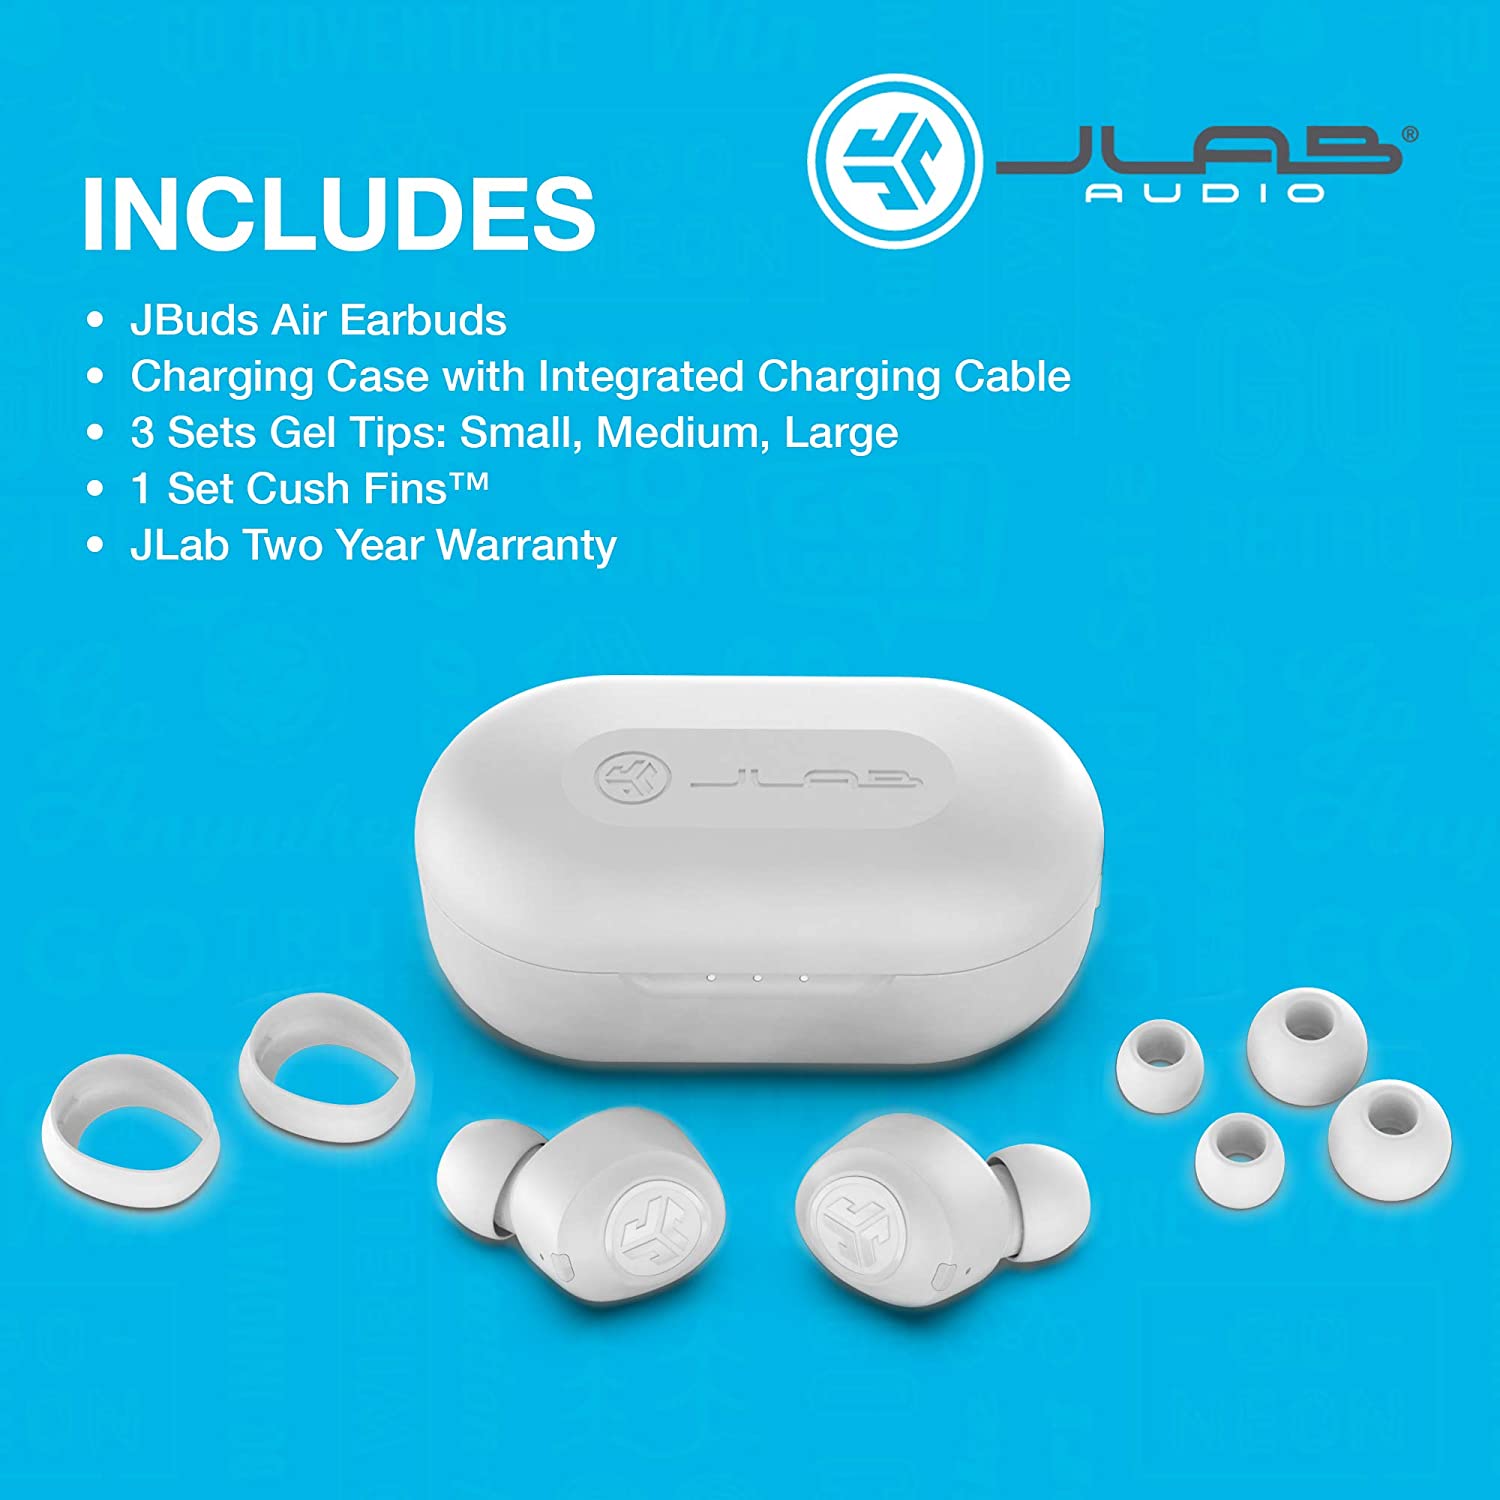 SmartTechShopping Wireless Earbuds JLab JBuds Air True Wireless Signature Bluetooth Earbuds with Charging Case White Bluetooth 5.0